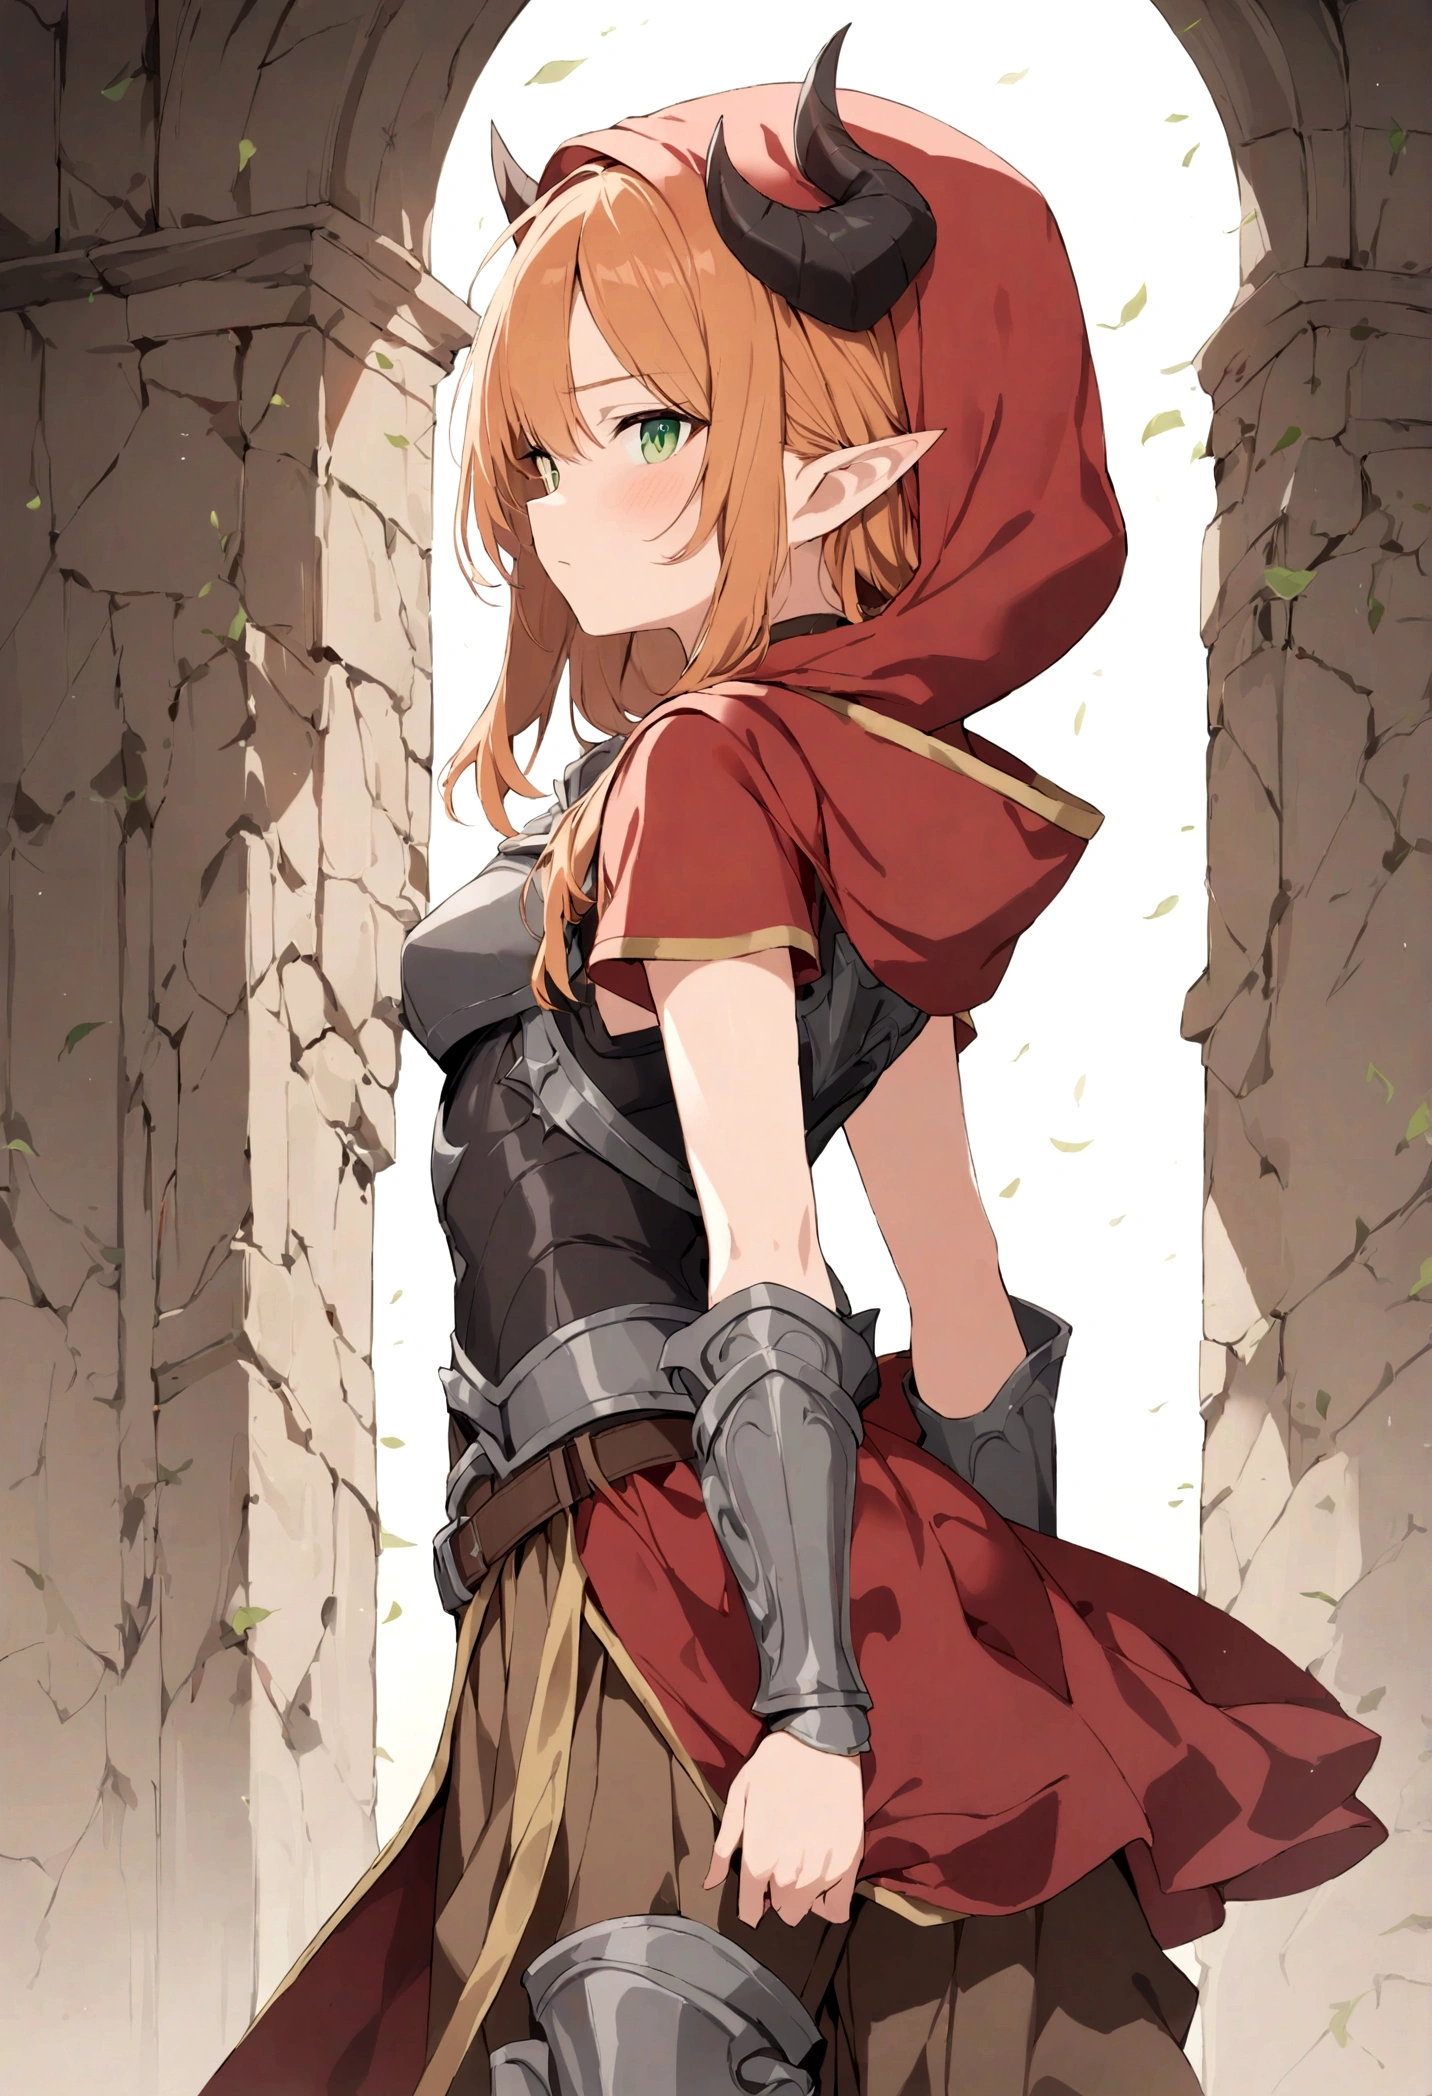 (1girl, Masterpiece, best quality) A young elf female with (long length intense orange hair and sharp side-swept fringe). Neutral, sligthly serious expression. Her attire includes a red cloak with yellow trim that covers a (medieval-style brown and gray chest piece). She has green eyes. She has a brown belt cinched around her waist. She wears brown pants with armored greaves.. (She's wearing a red hood ((with attached (gray horns tilted back) to hood.)).)
